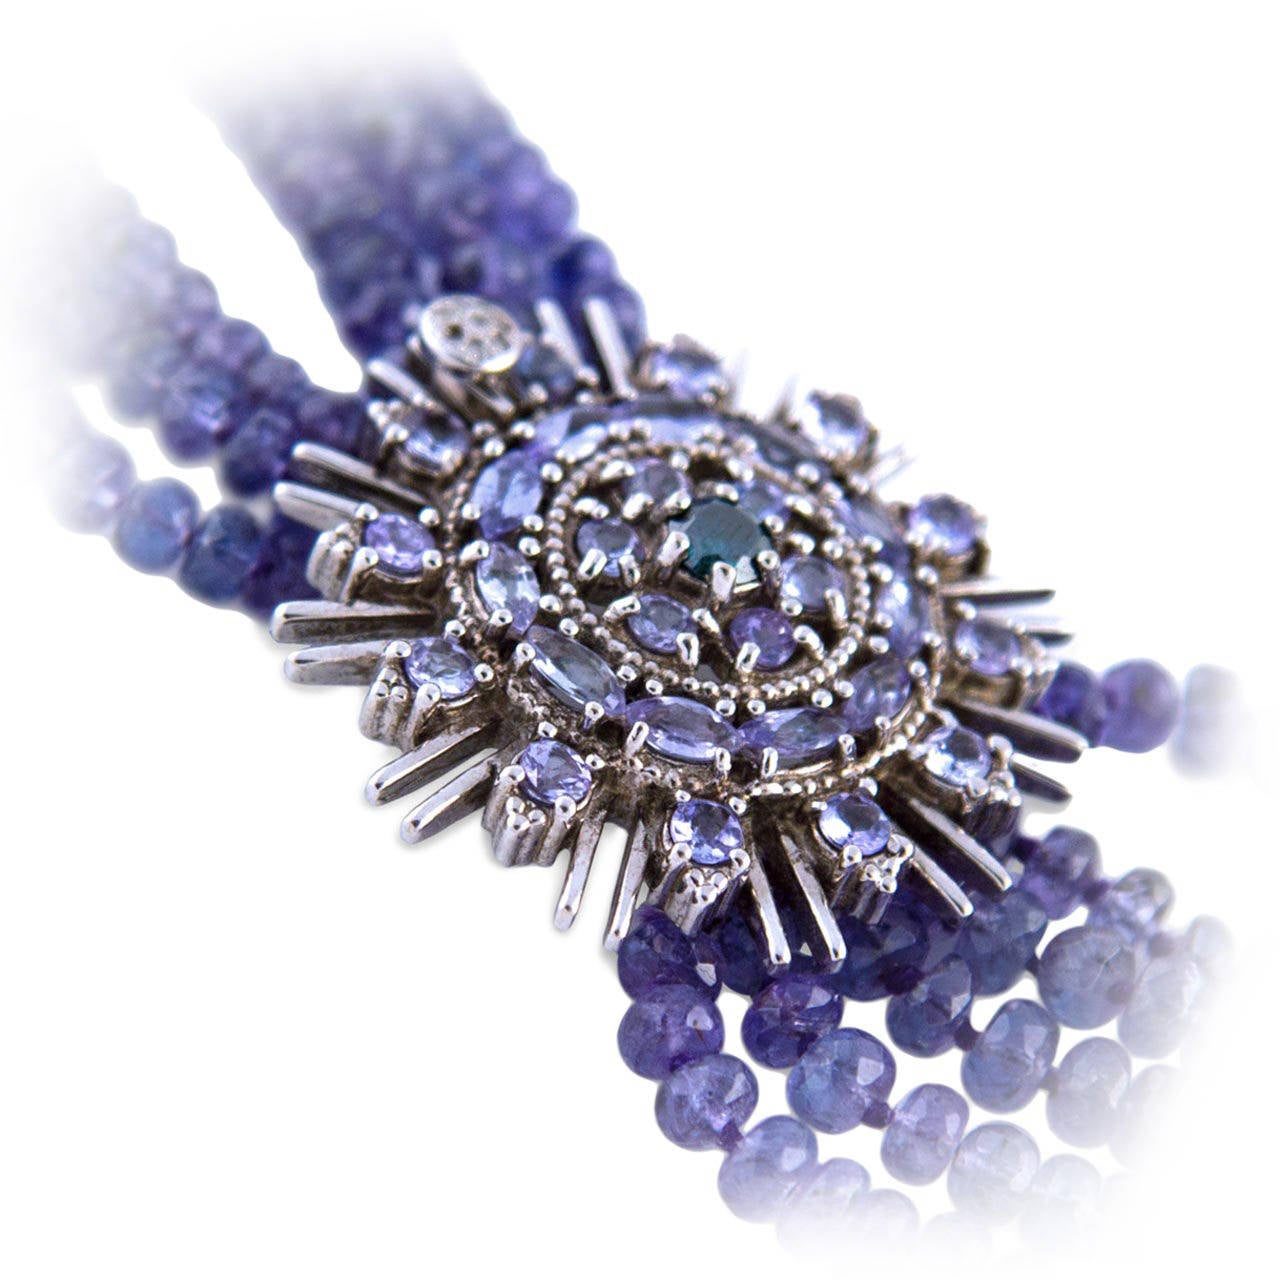 Beautiful Tanzanite 6 strand necklace, beveled beads from diameter 3 to 8 mm, total approx 550ct, clasp in 583 white gold with diamonds total approx 0,45ct, length 20,47in, total weight 132,2g